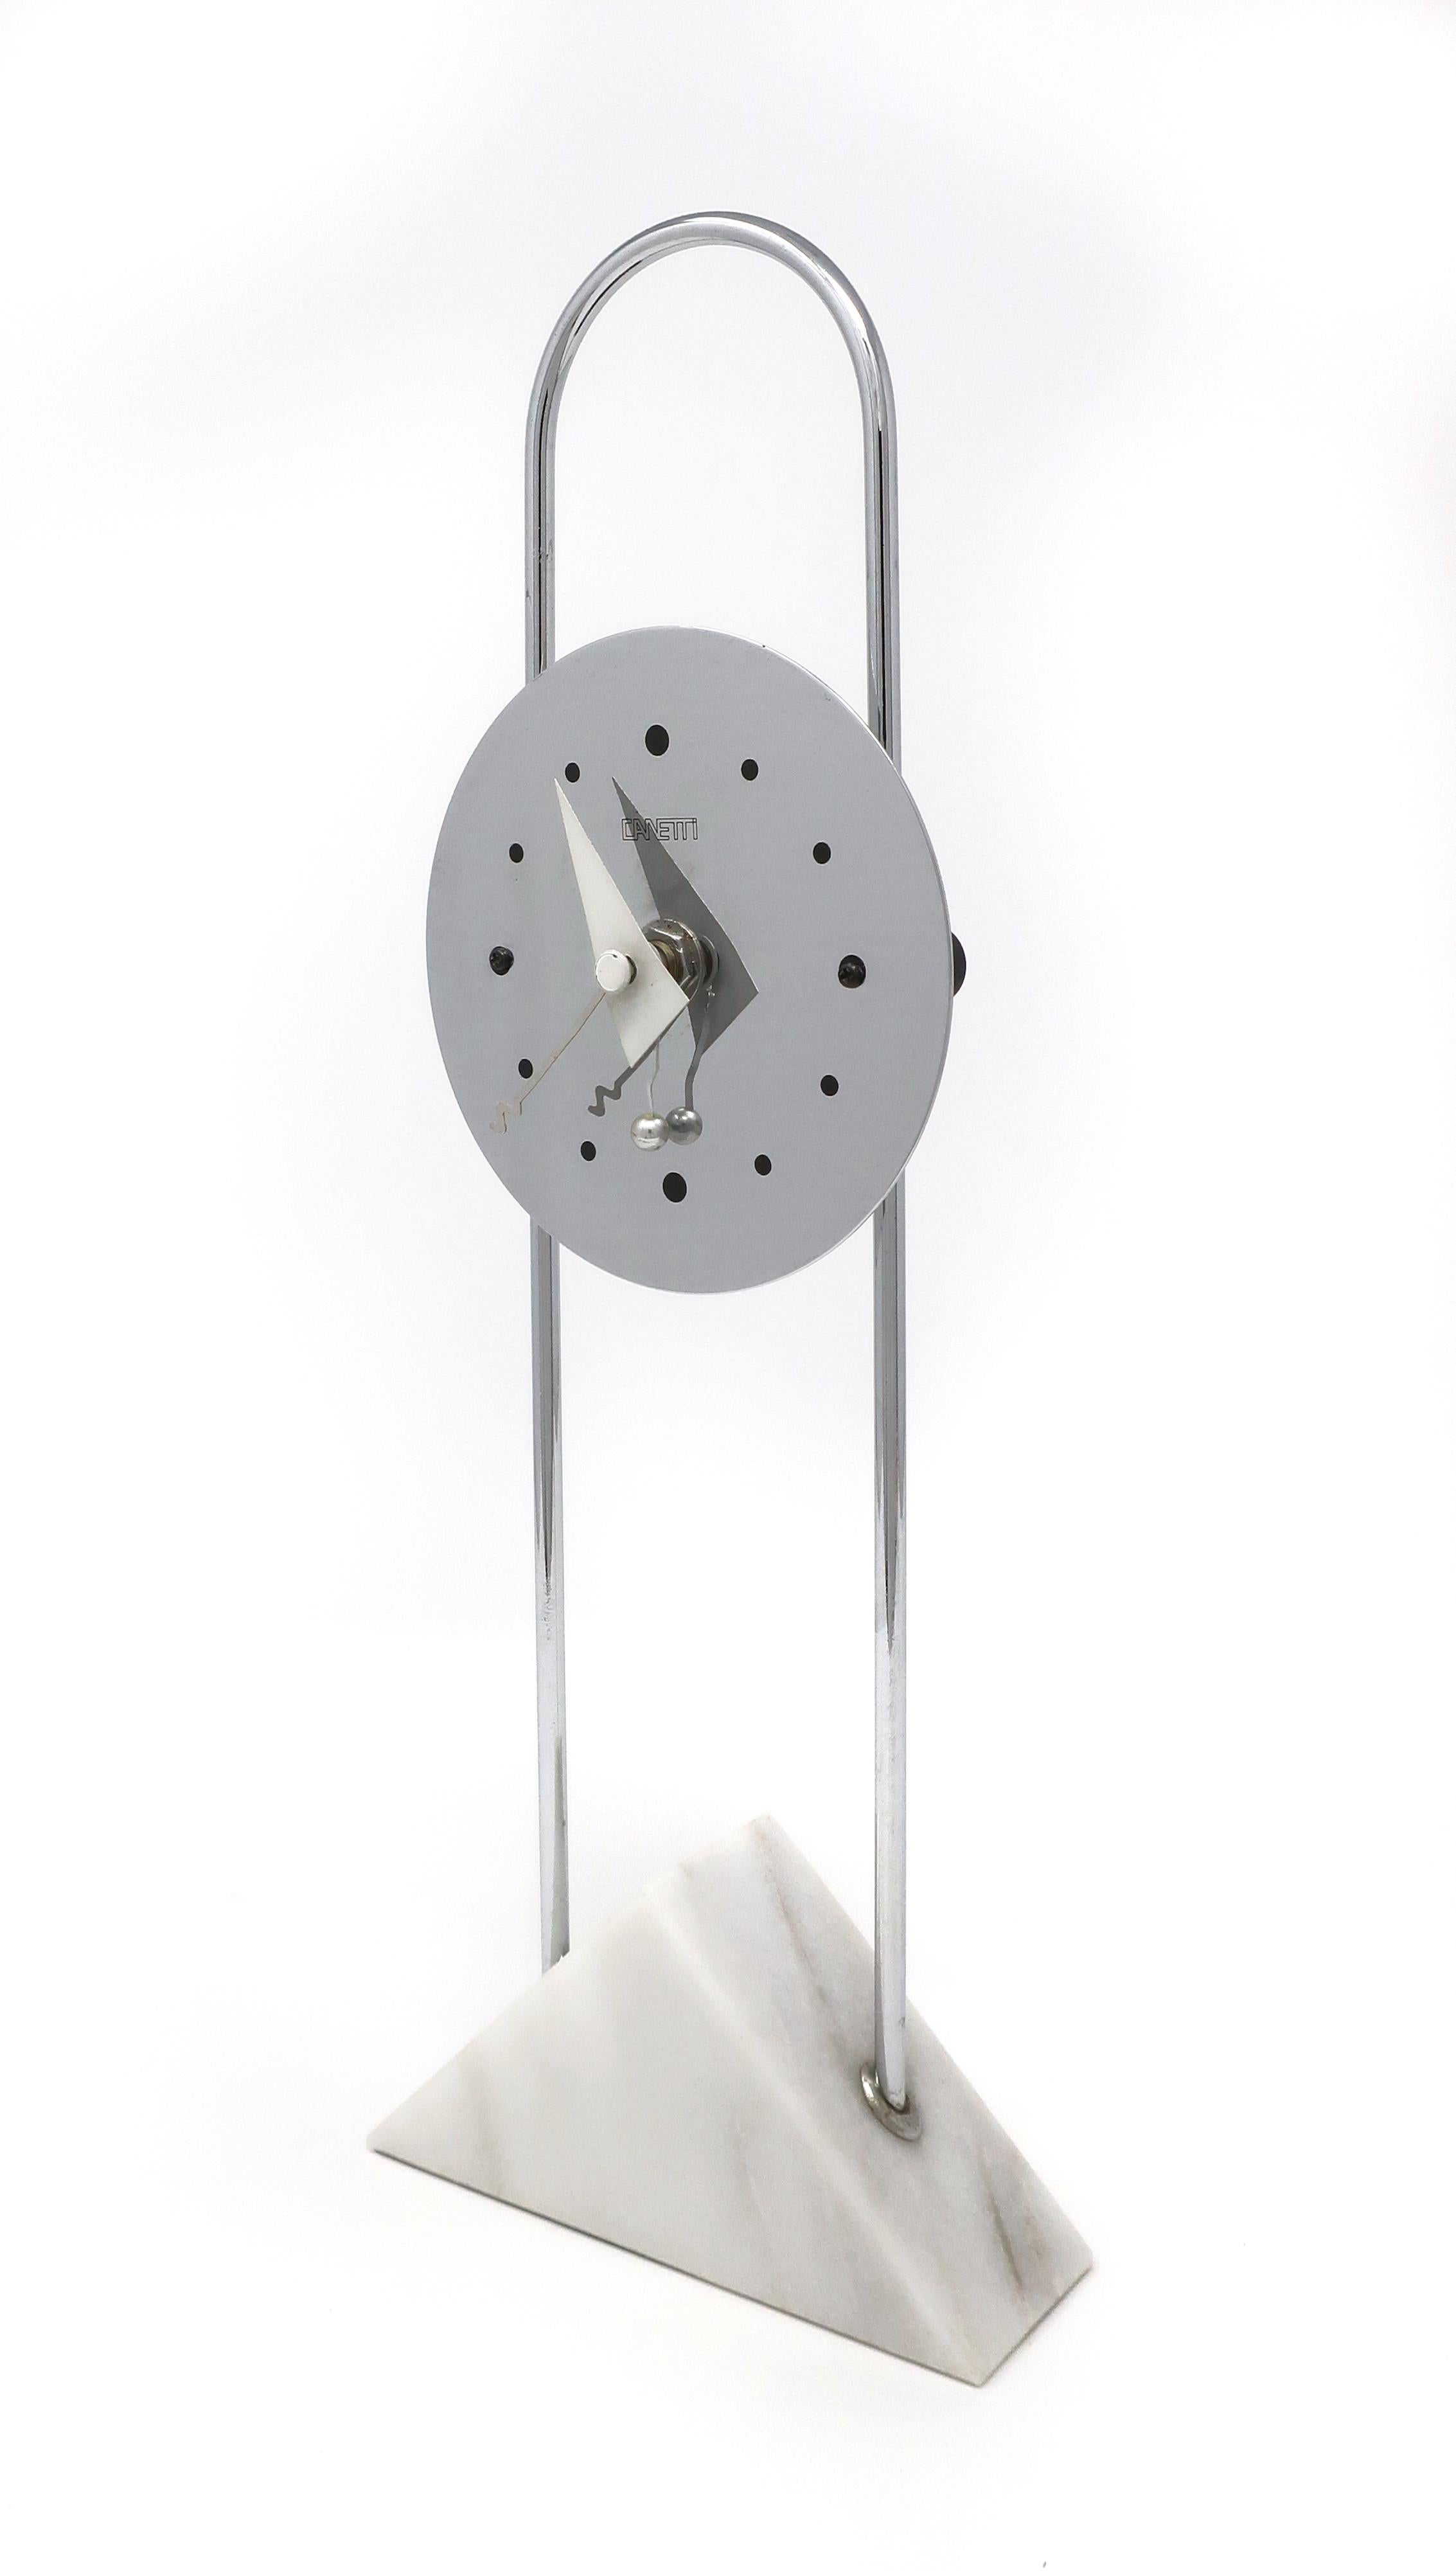 A stunning post modern clock by Canetti with a chrome face on an arching chrome stem set in a white marble base. Dated 1989, this clock screams its Memphis inspiration from the use of primary shapes to the quicky shapes of the clock’s hands. In very